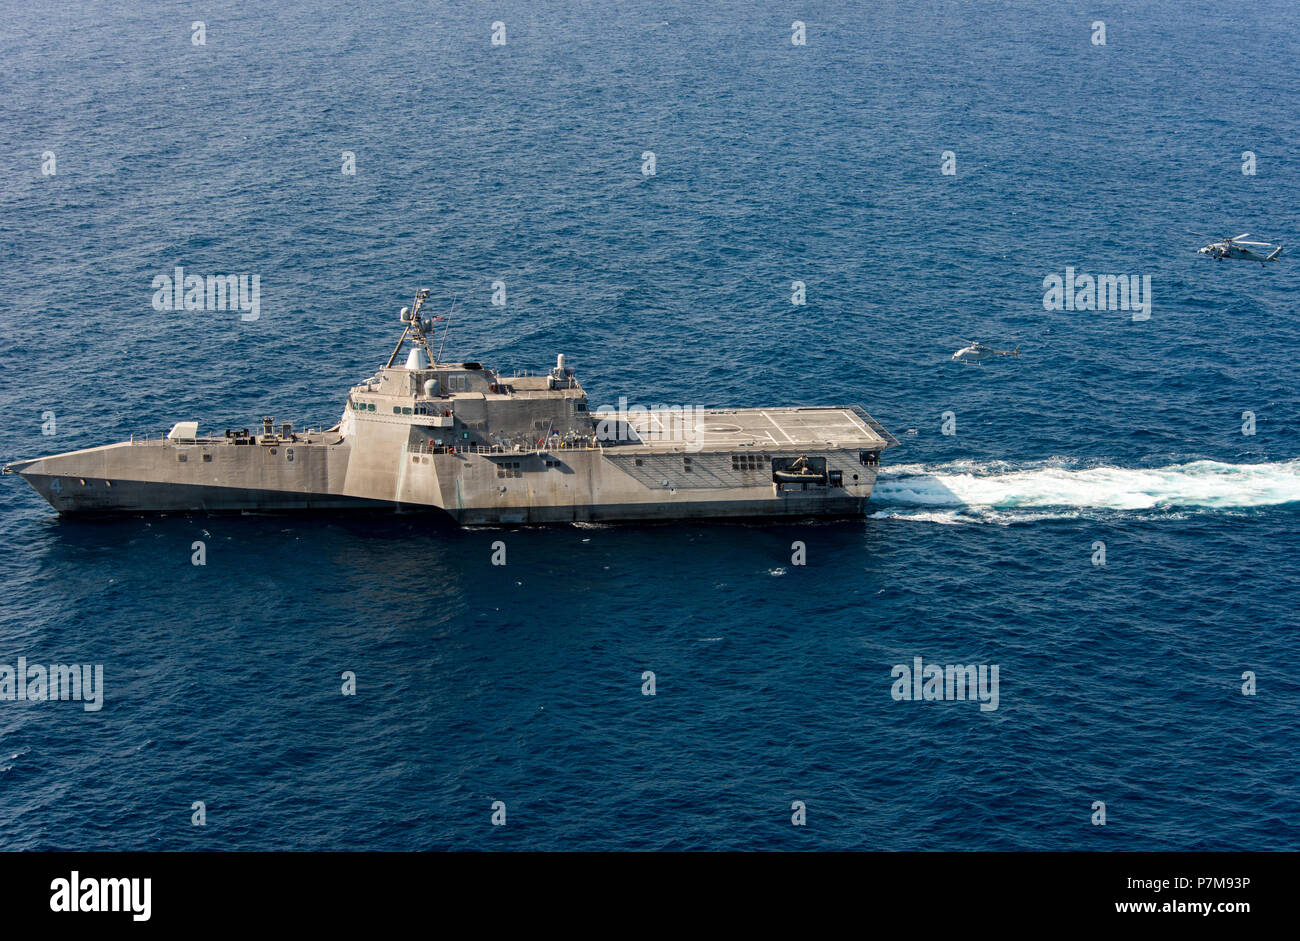 180628-N-BT947-1540  PACIFIC OCEAN (June 28, 2018) - An MQ-8C Fire Scout unmanned helicopter conducts underway operations with an MH-60S Seahawk helicopter and the Independence-variant littoral combat ship USS Coronado (LCS 4). The new Fire Scout variant is expected to deploy with the LCS class to provide reconnaissance, situational awareness, and precision targeting support. Coronado is working with Air Test and Evaluation Squadron 1 (VX-1) to test the newest Fire Scout unmanned helicopter. Coronado is one of four designated test ships in the LCS class assigned to Littoral Combat Ship Squadro Stock Photo